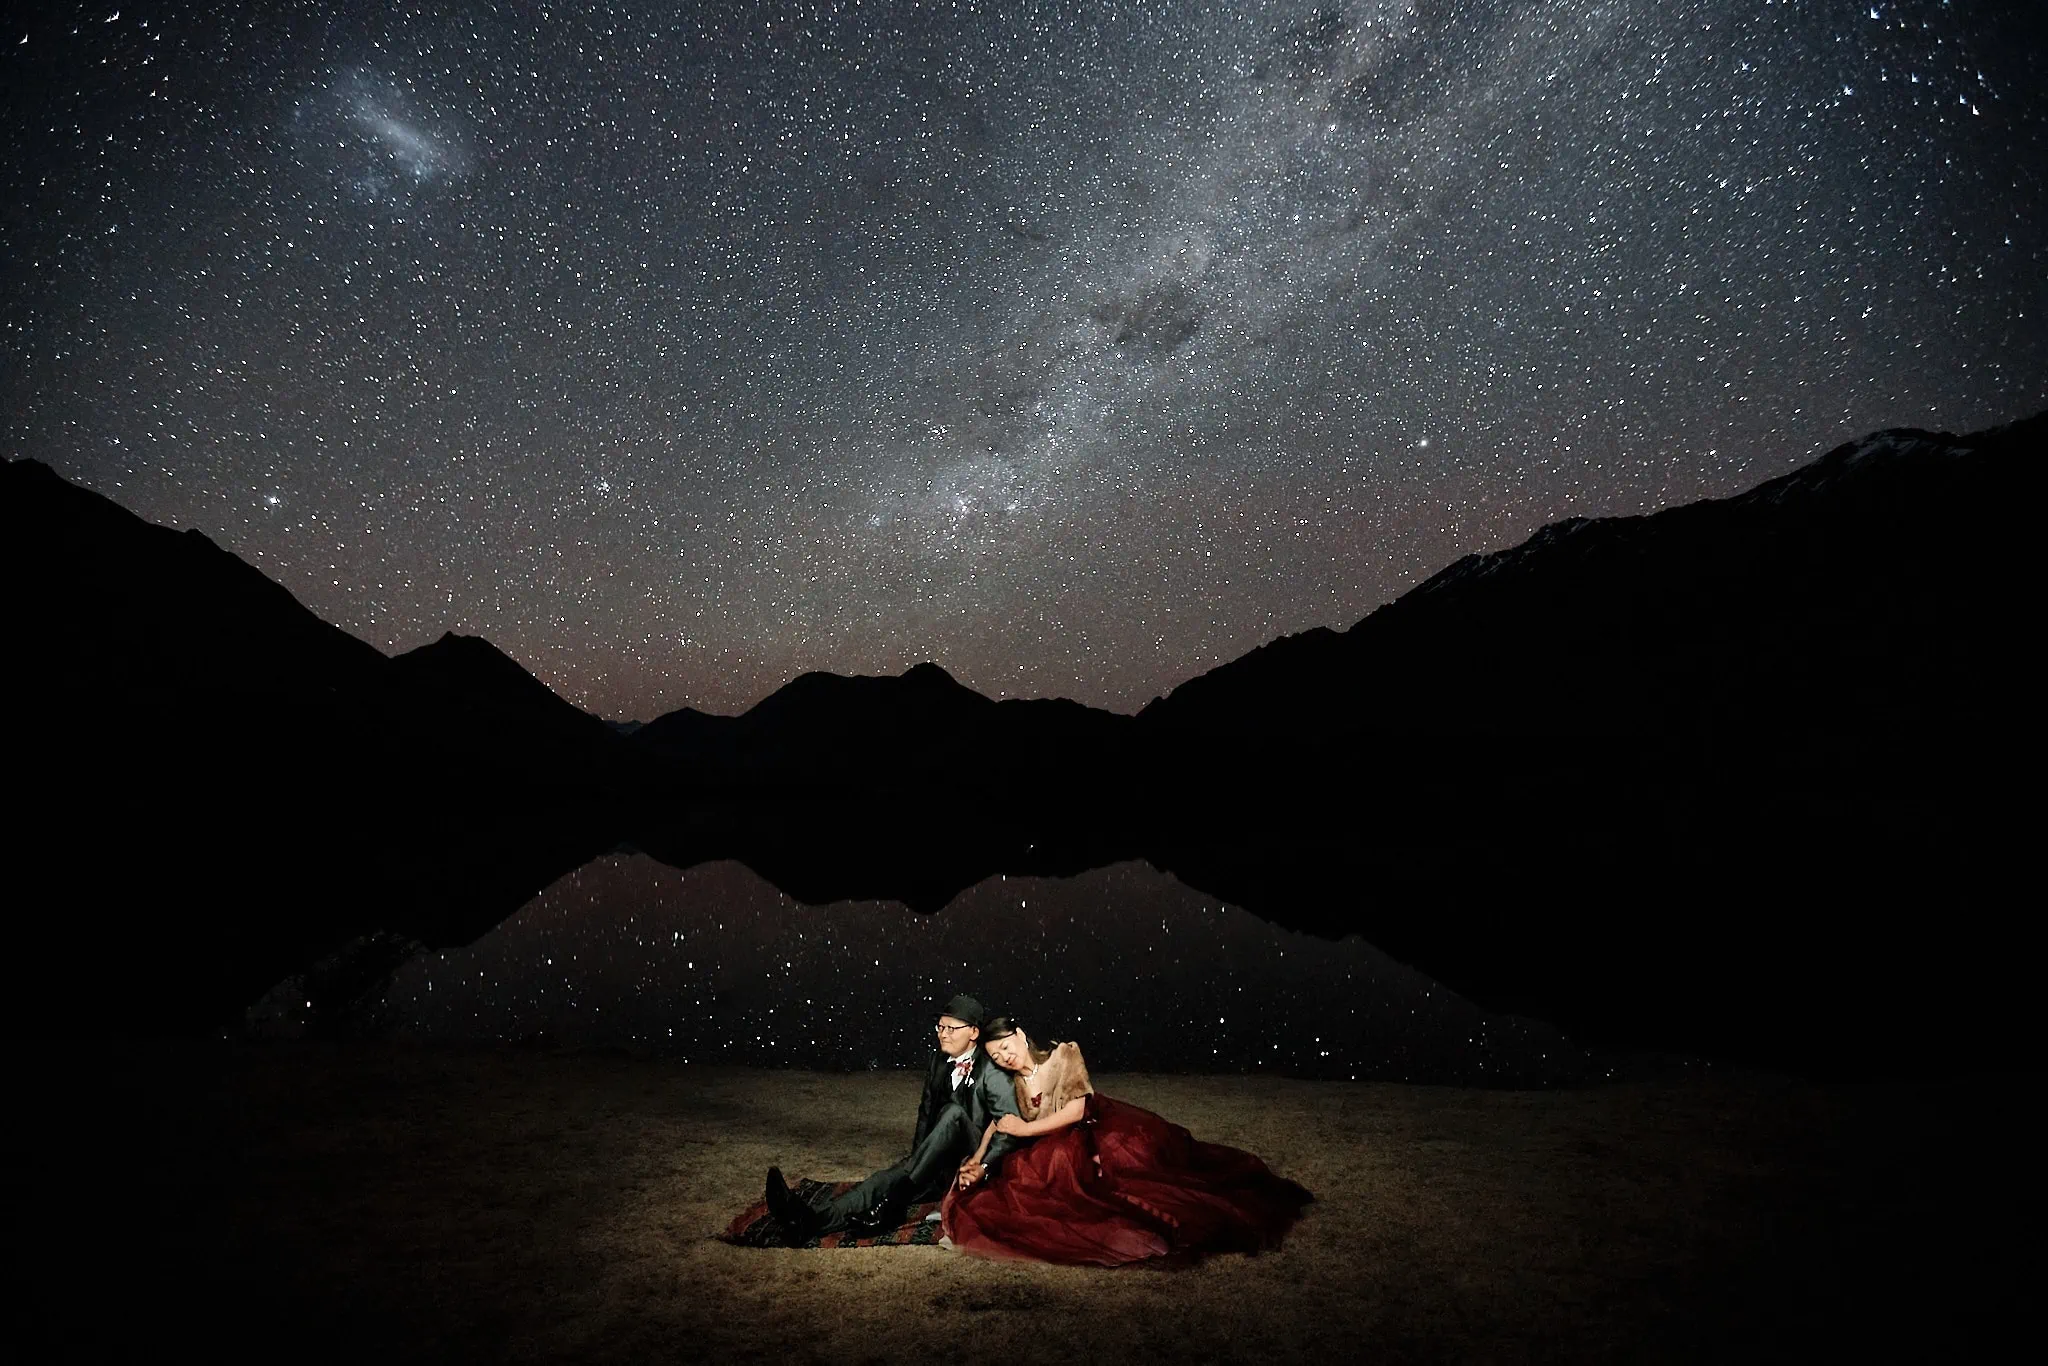 Queenstown New Zealand Elopement Wedding Photographer - A bride and groom enjoying a romantic starry night on a lake for their portfolio shoot.